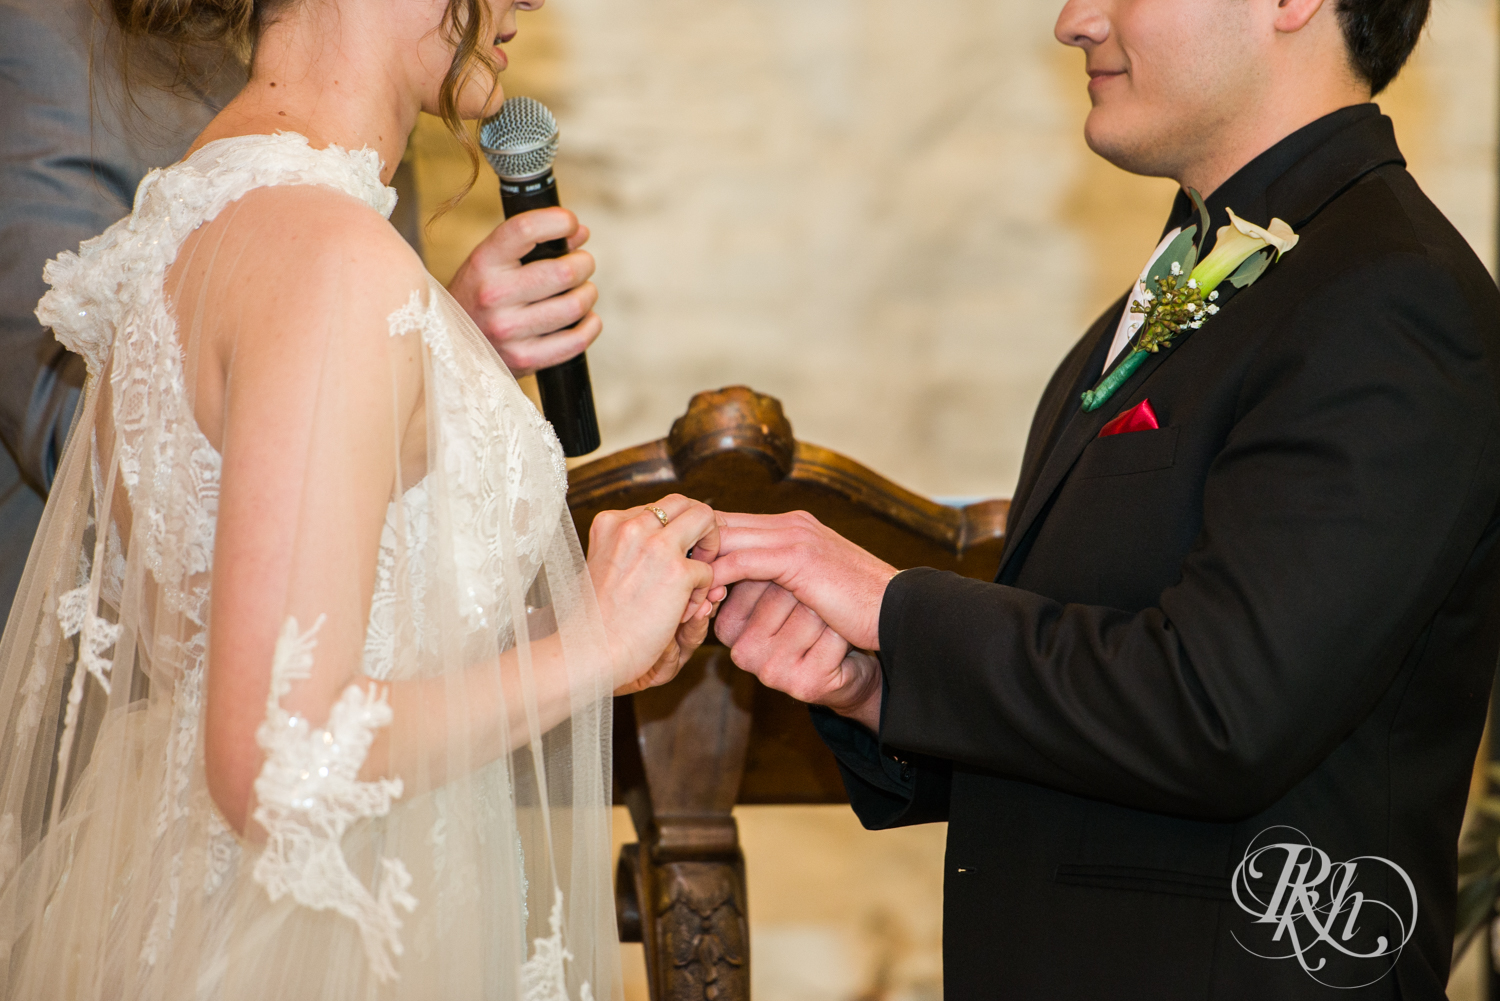 Bride and groom exchange rings at wedding ceremony at Kellerman's Event Center in White Bear Lake, Minnesota.